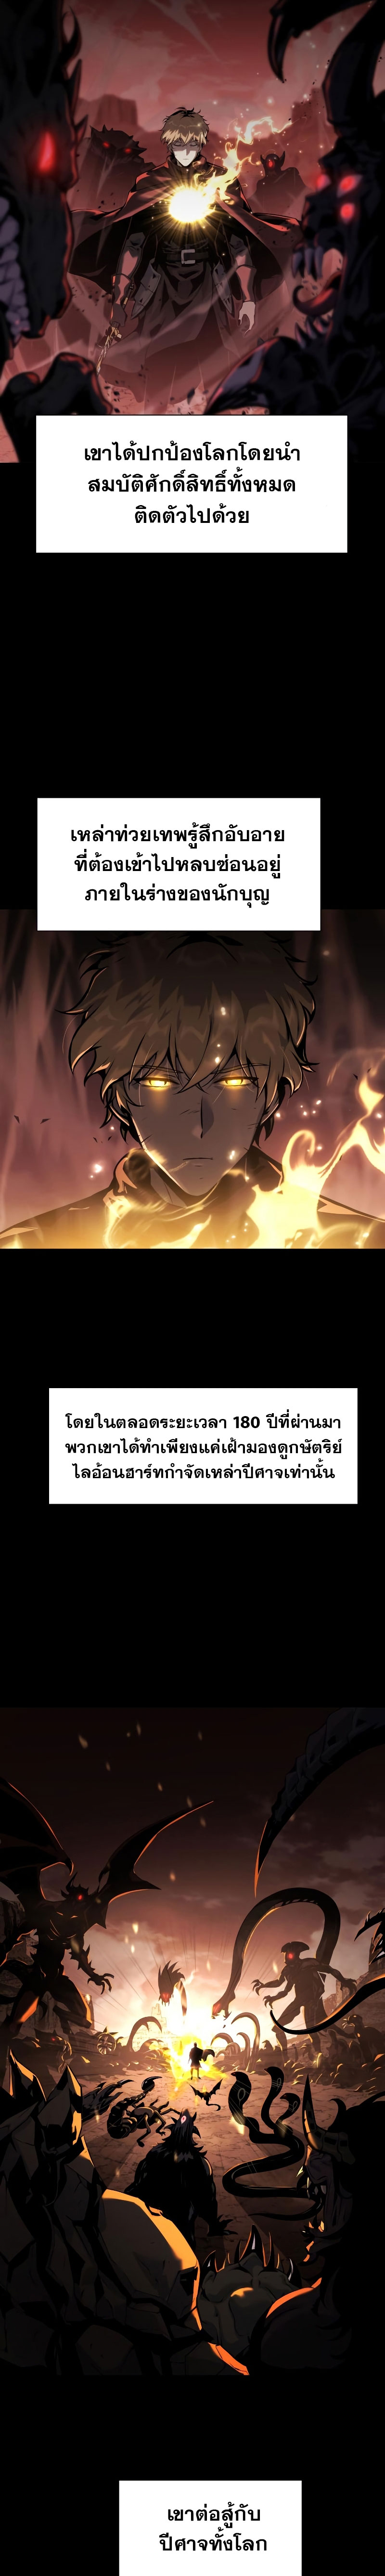 The Knight King 17 (9)